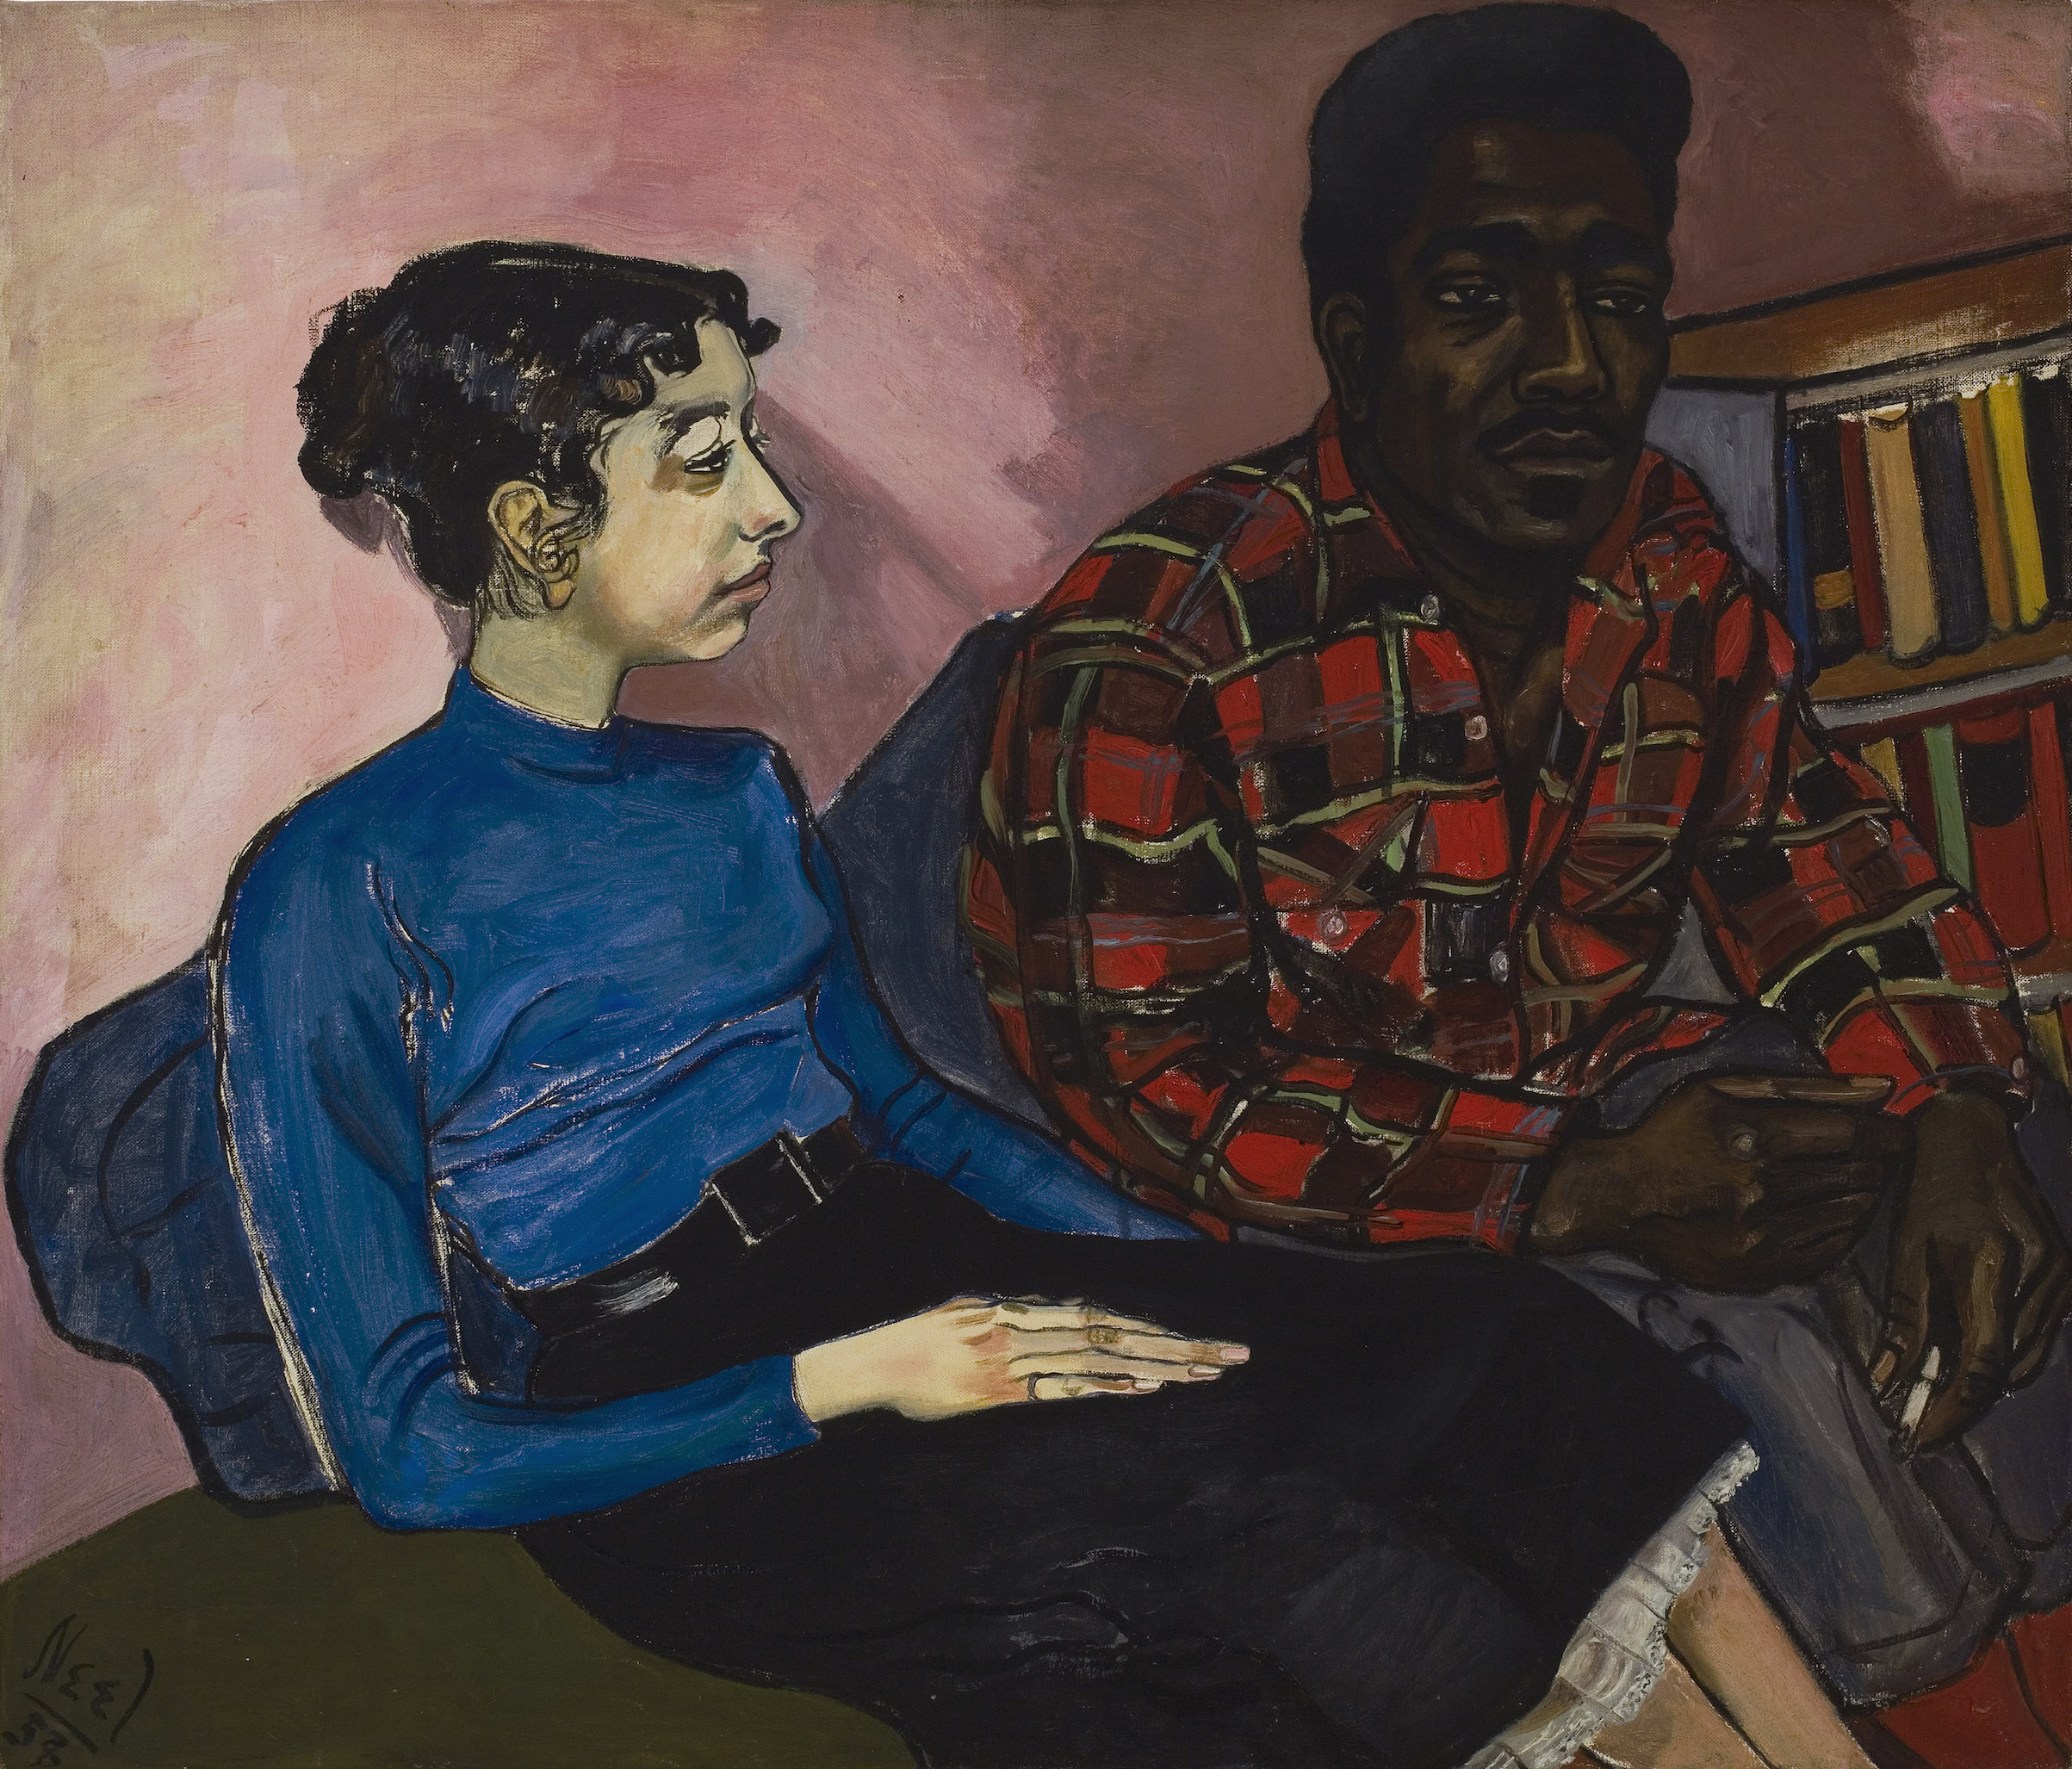 Alice Neel. Rita and Hubert. 1954. Oil on canvas. 34 × 40 in. Private collection. © Estate of Alice Neel.